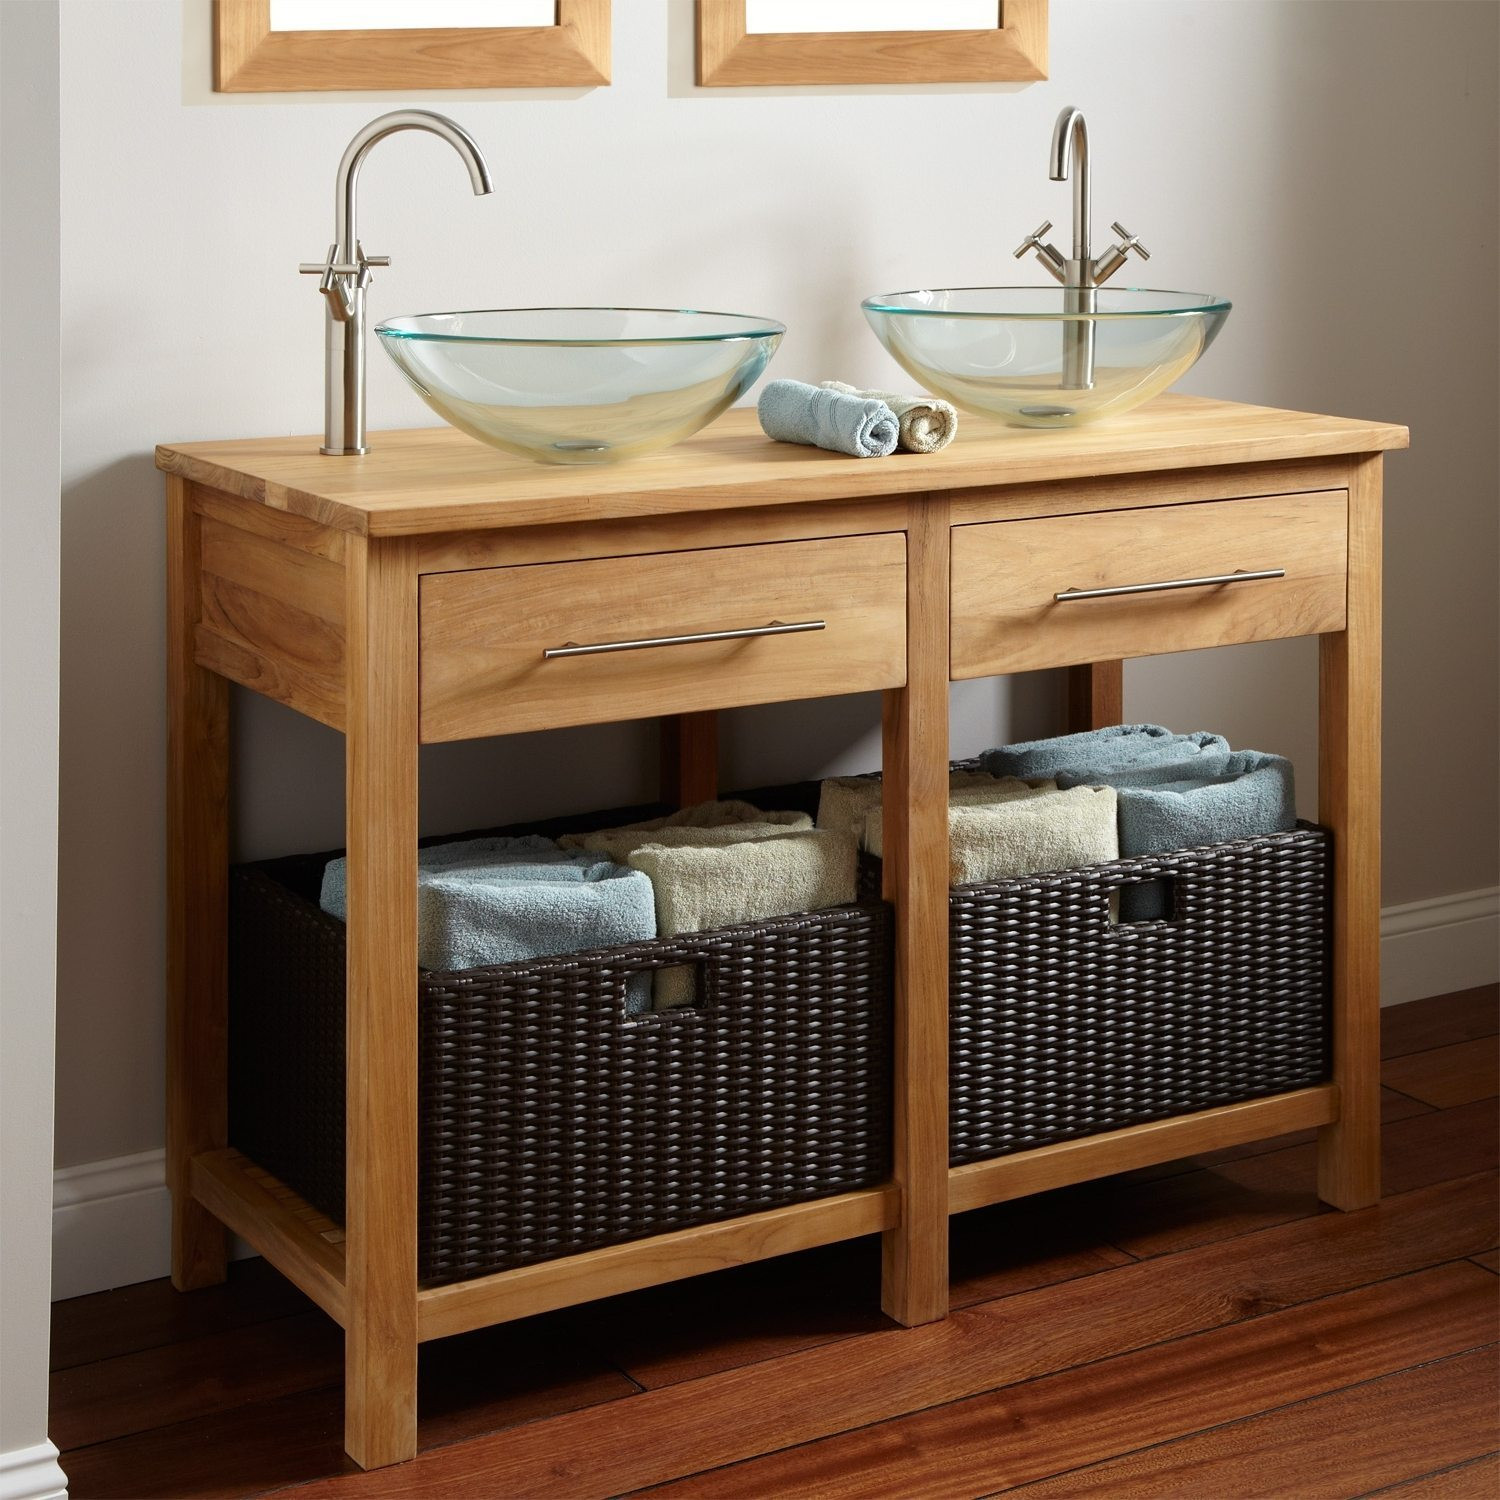 Bathroom Vanity Cabinets Without Tops
 Bathroom Interesting Vanities Without Tops For Modern